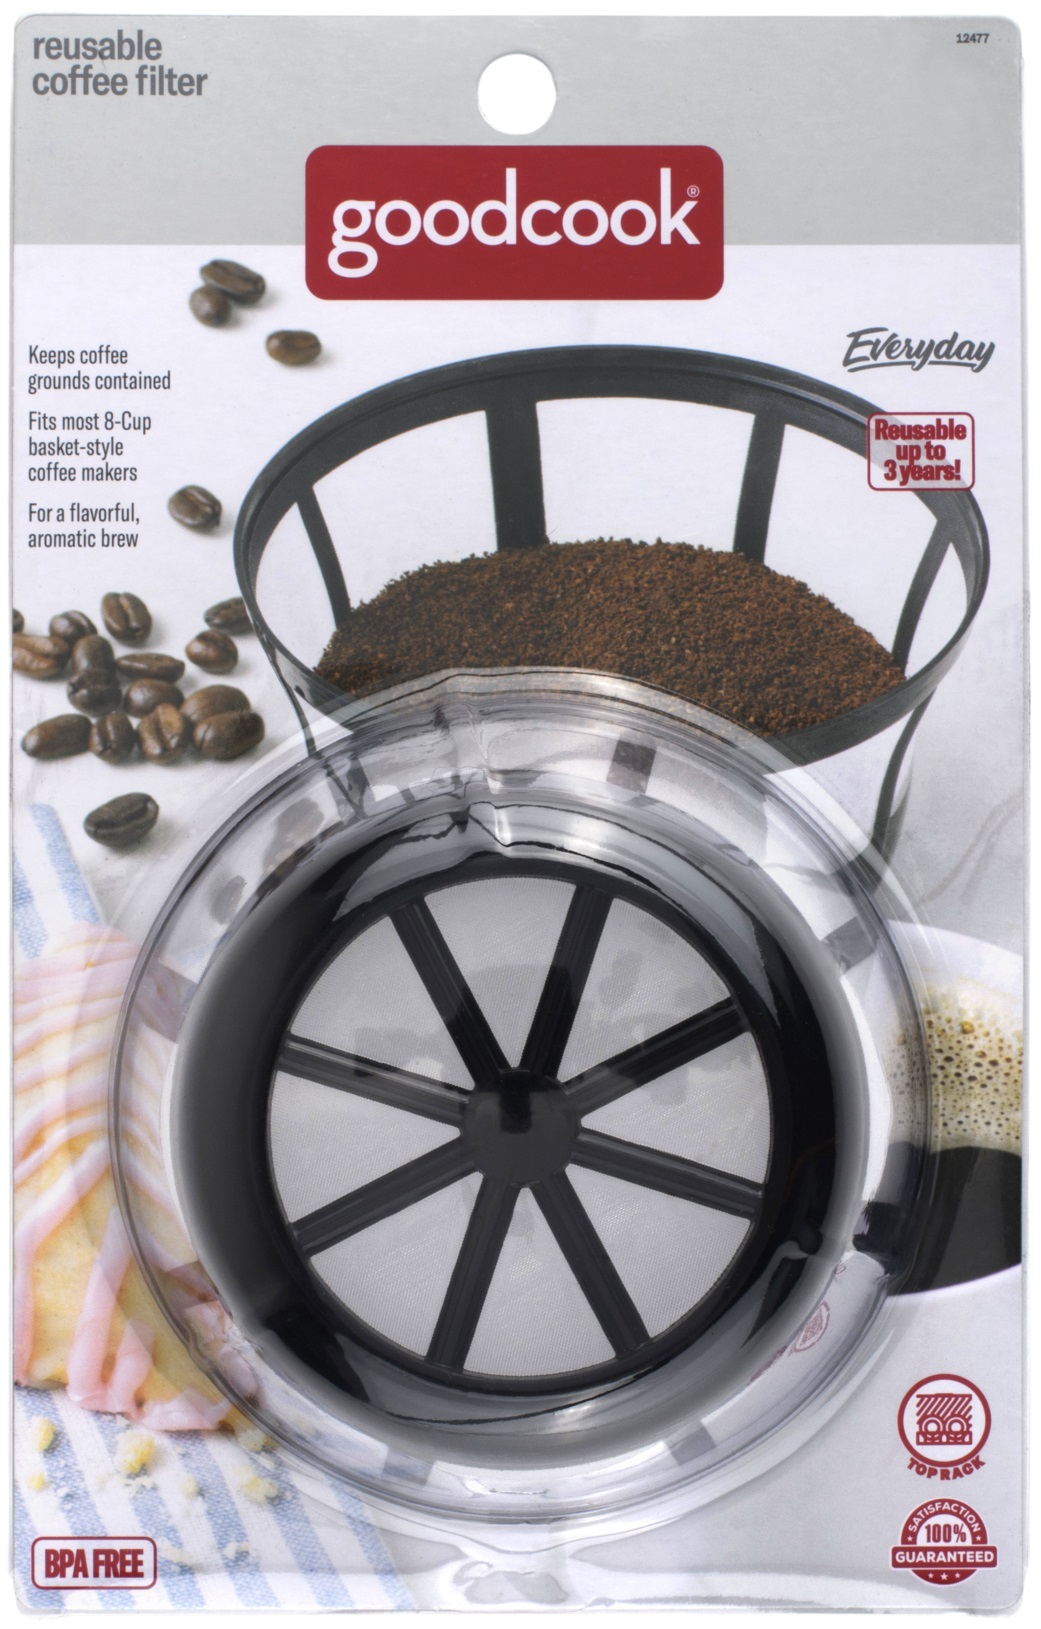 12477_GoodCook_Everyday_Reusable Basket Coffee Filter_Packaging 1.psd